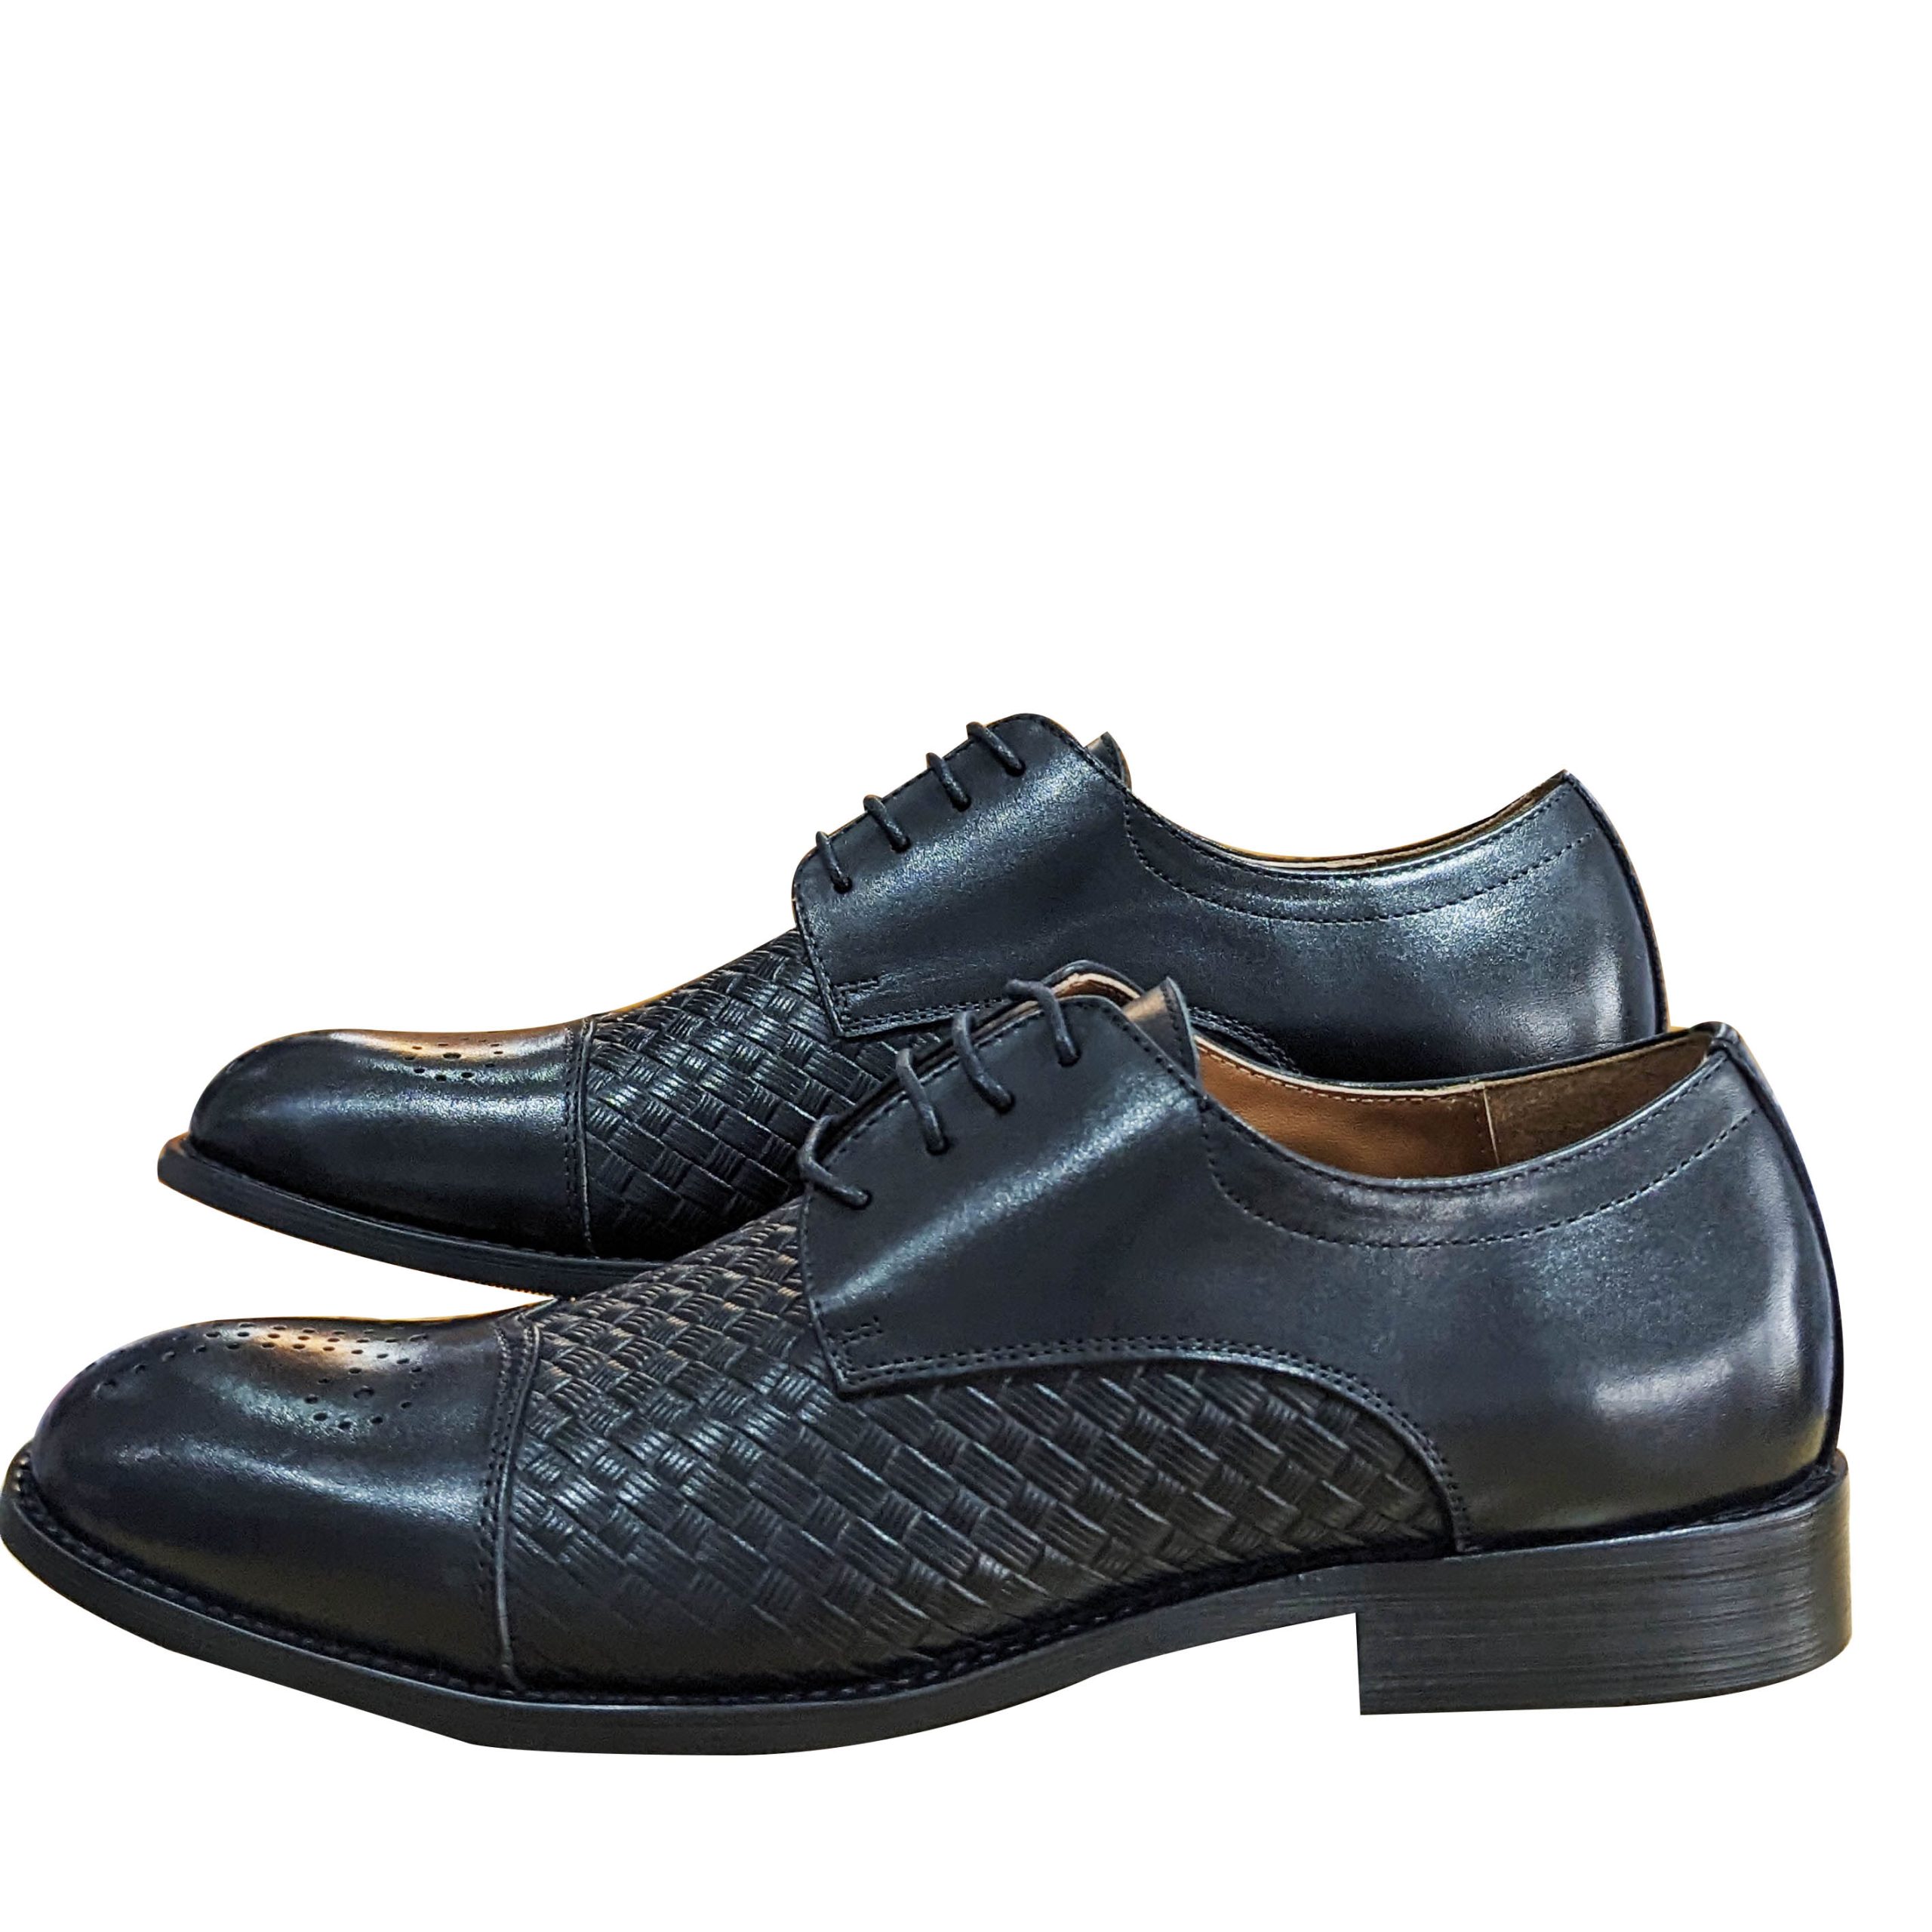 Classic Anax New Collection Shoes for Men - Okstyle